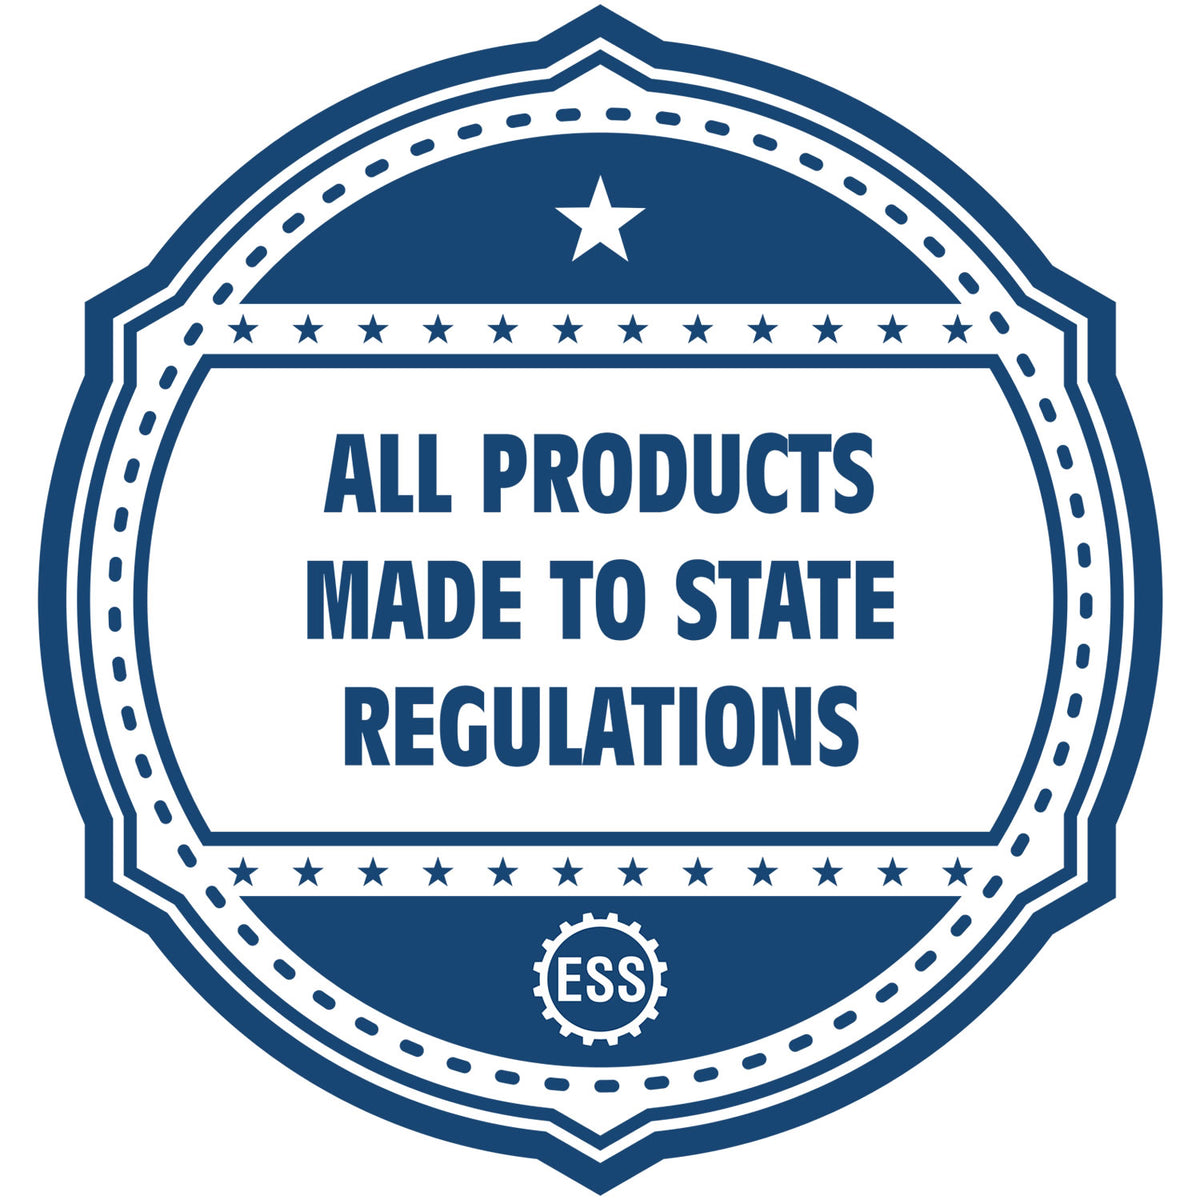 An icon or badge element for the District of Columbia Soft Land Surveyor Embossing Seal showing that this product is made in compliance with state regulations.